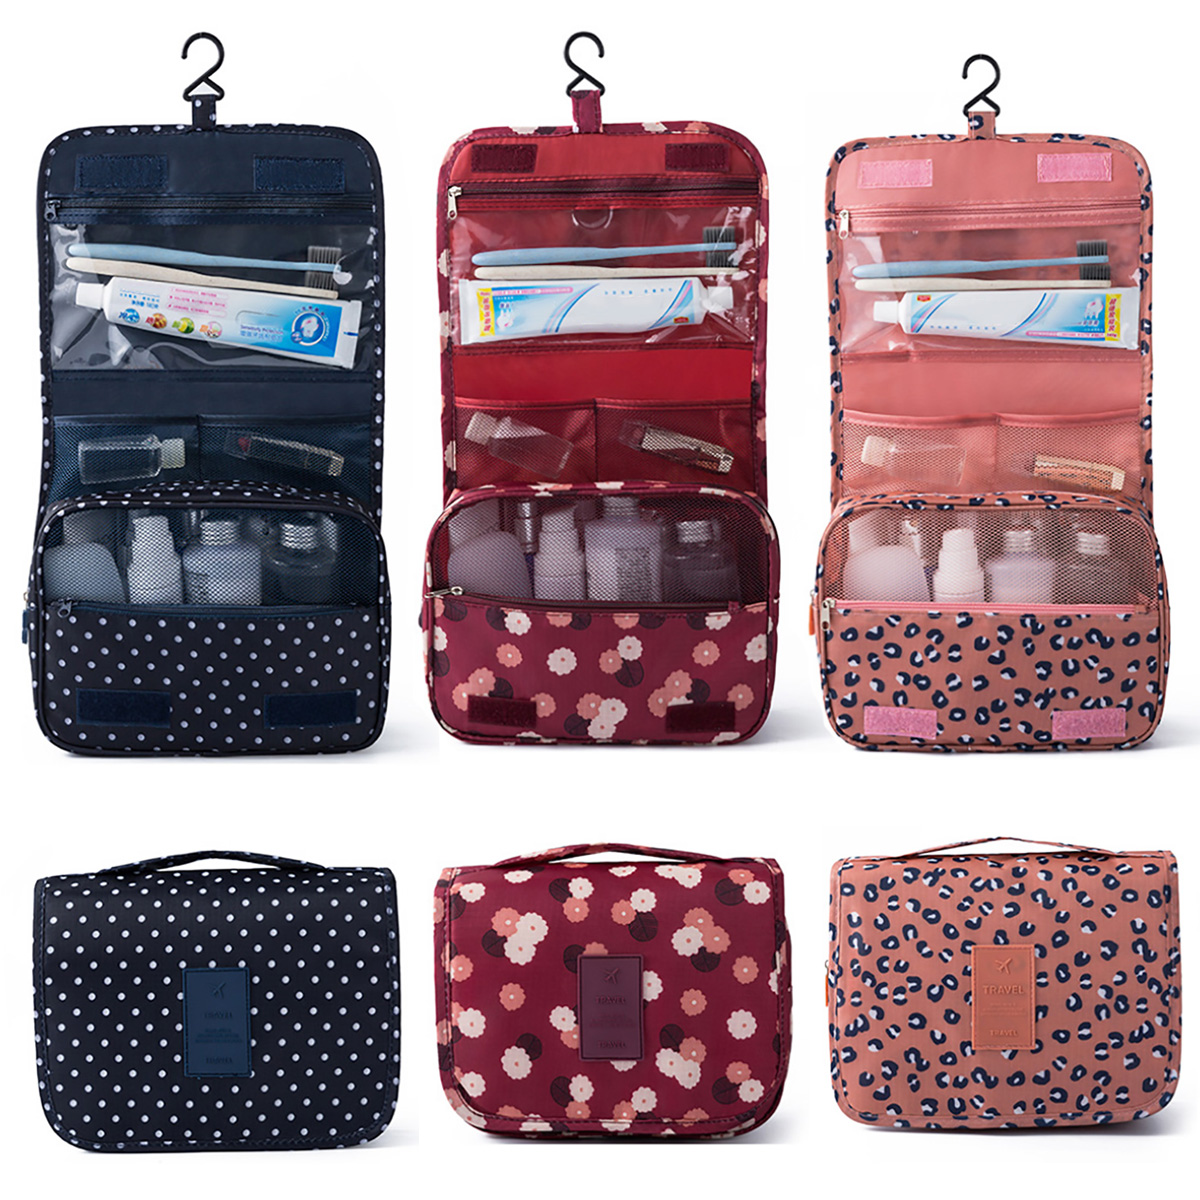 

Travel Cosmetic Storage MakeUp Bag Folding Hanging Wash Organizer Pouch Toiletry